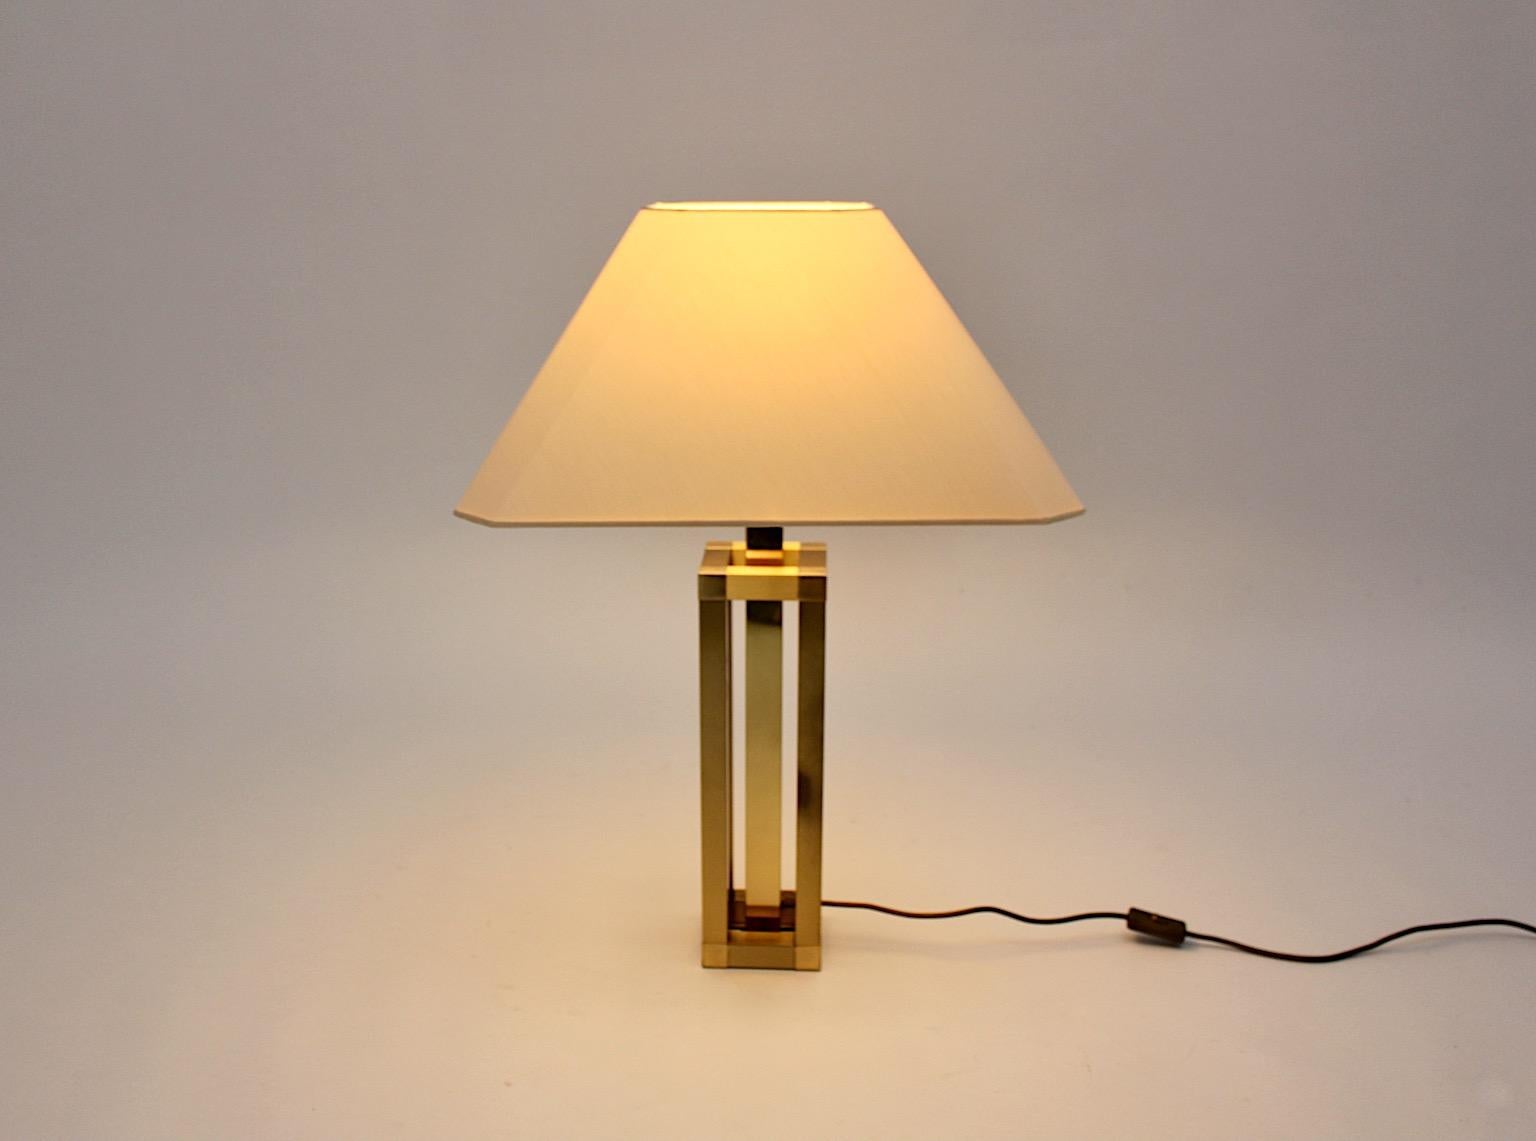 20th Century Hollywood Regency Style Vintage Brass Table Lamp Romeo Rega Style, Italy, 1970s For Sale